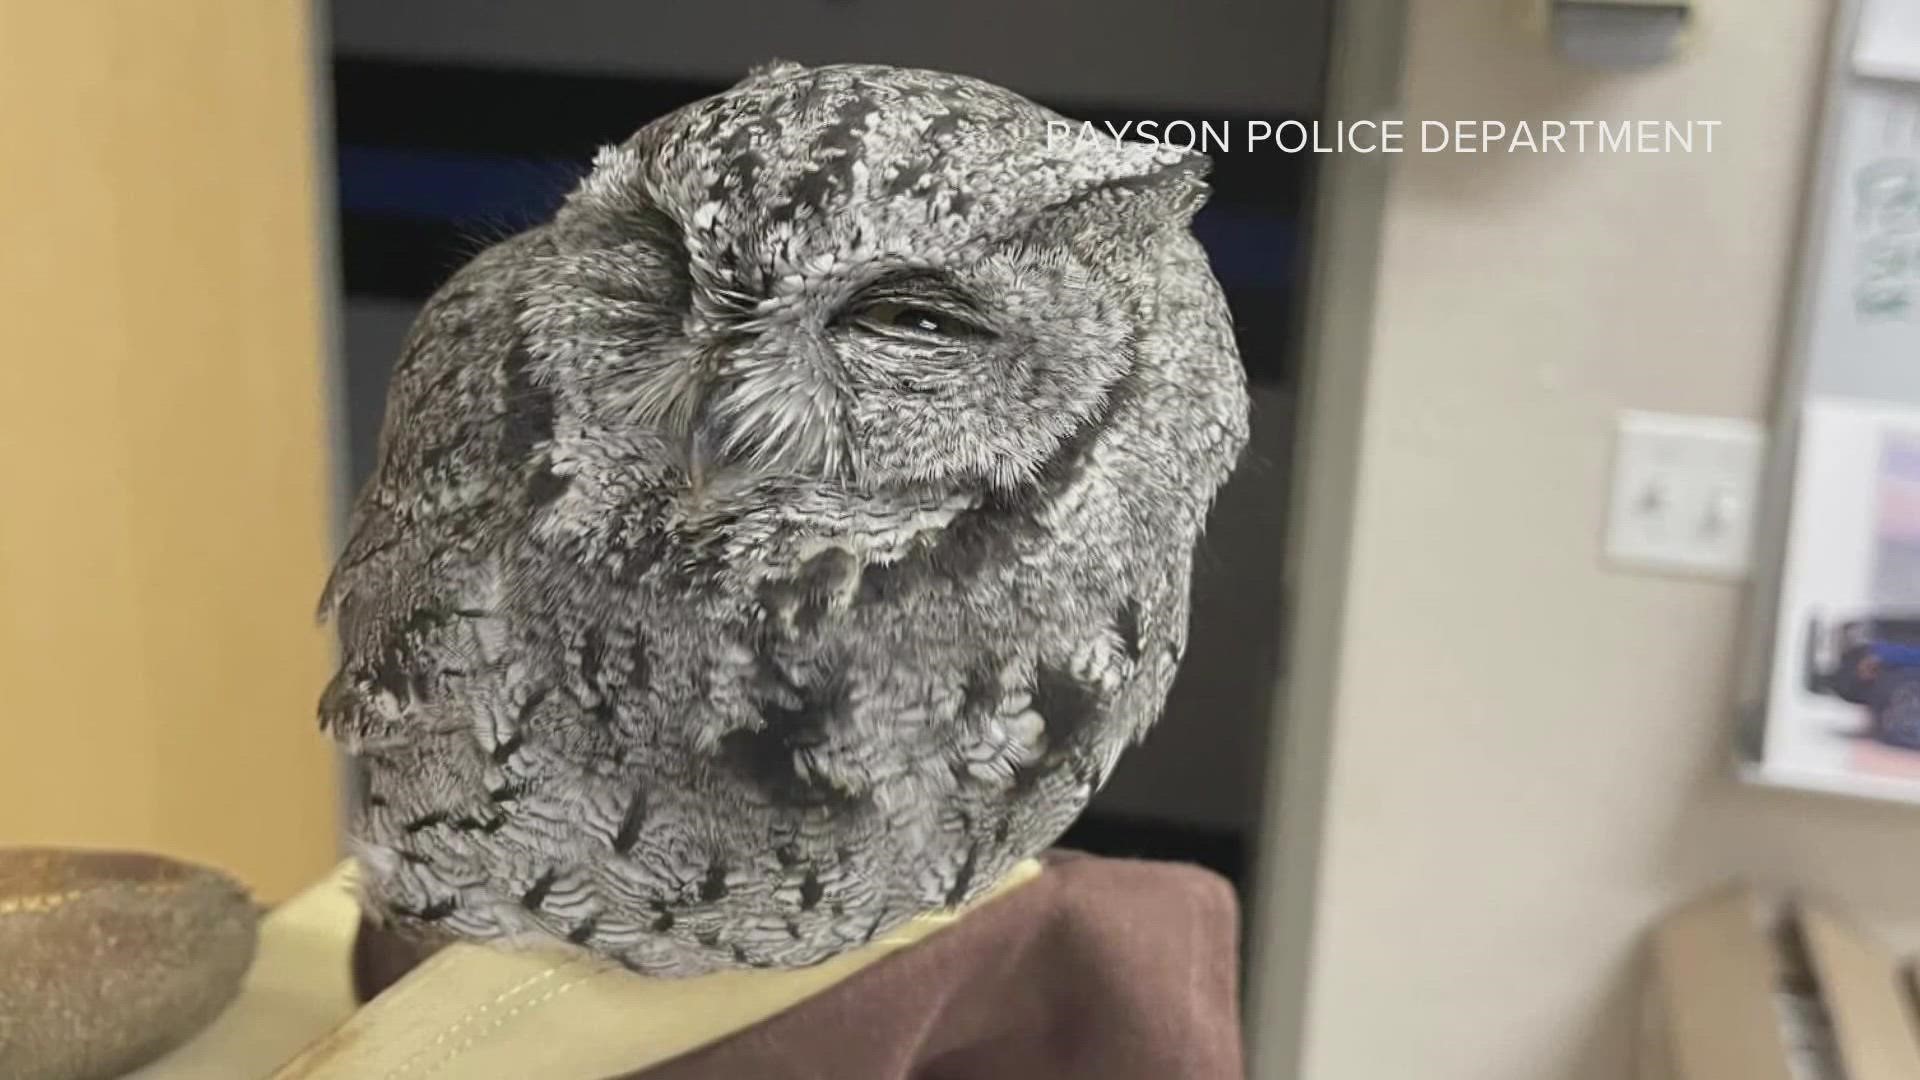 Officers in Payson discovered the owl during a traffic stop, where the driver was arrested on DUI and drug charges.